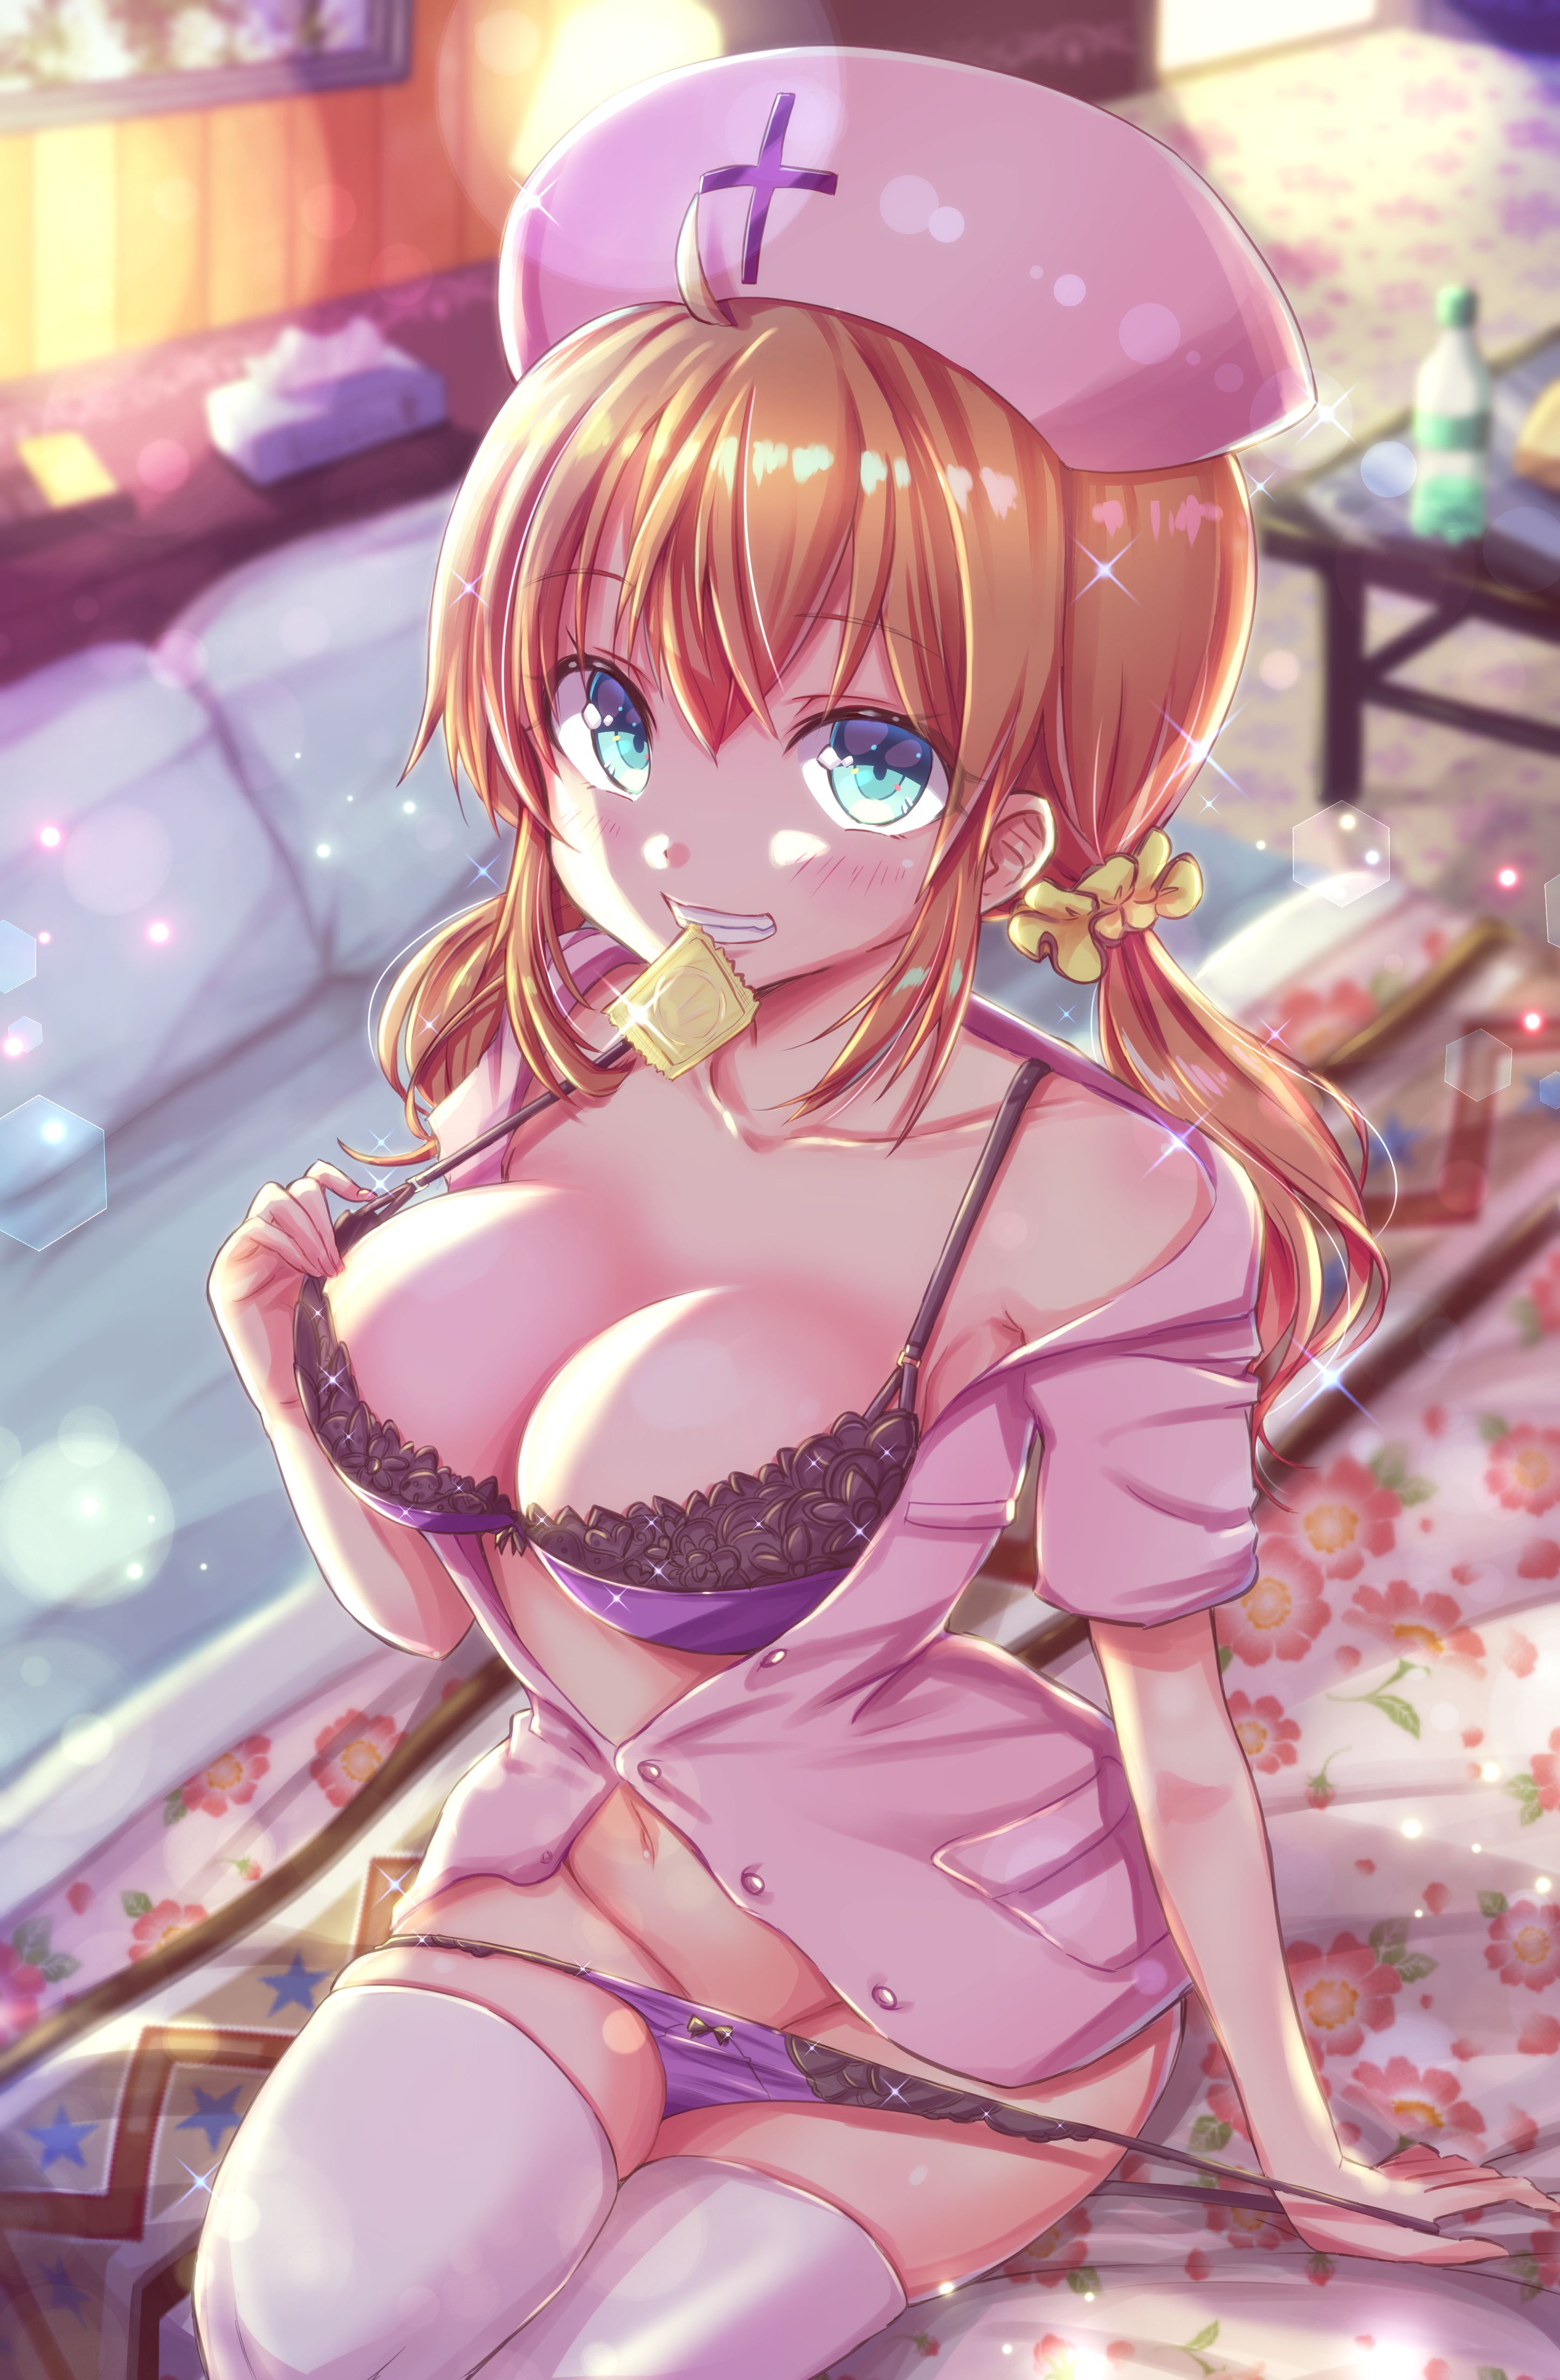 Erotic anime summary Erotic image collection of beautiful girls who are excellent compatibility with condoms [50 sheets] 37